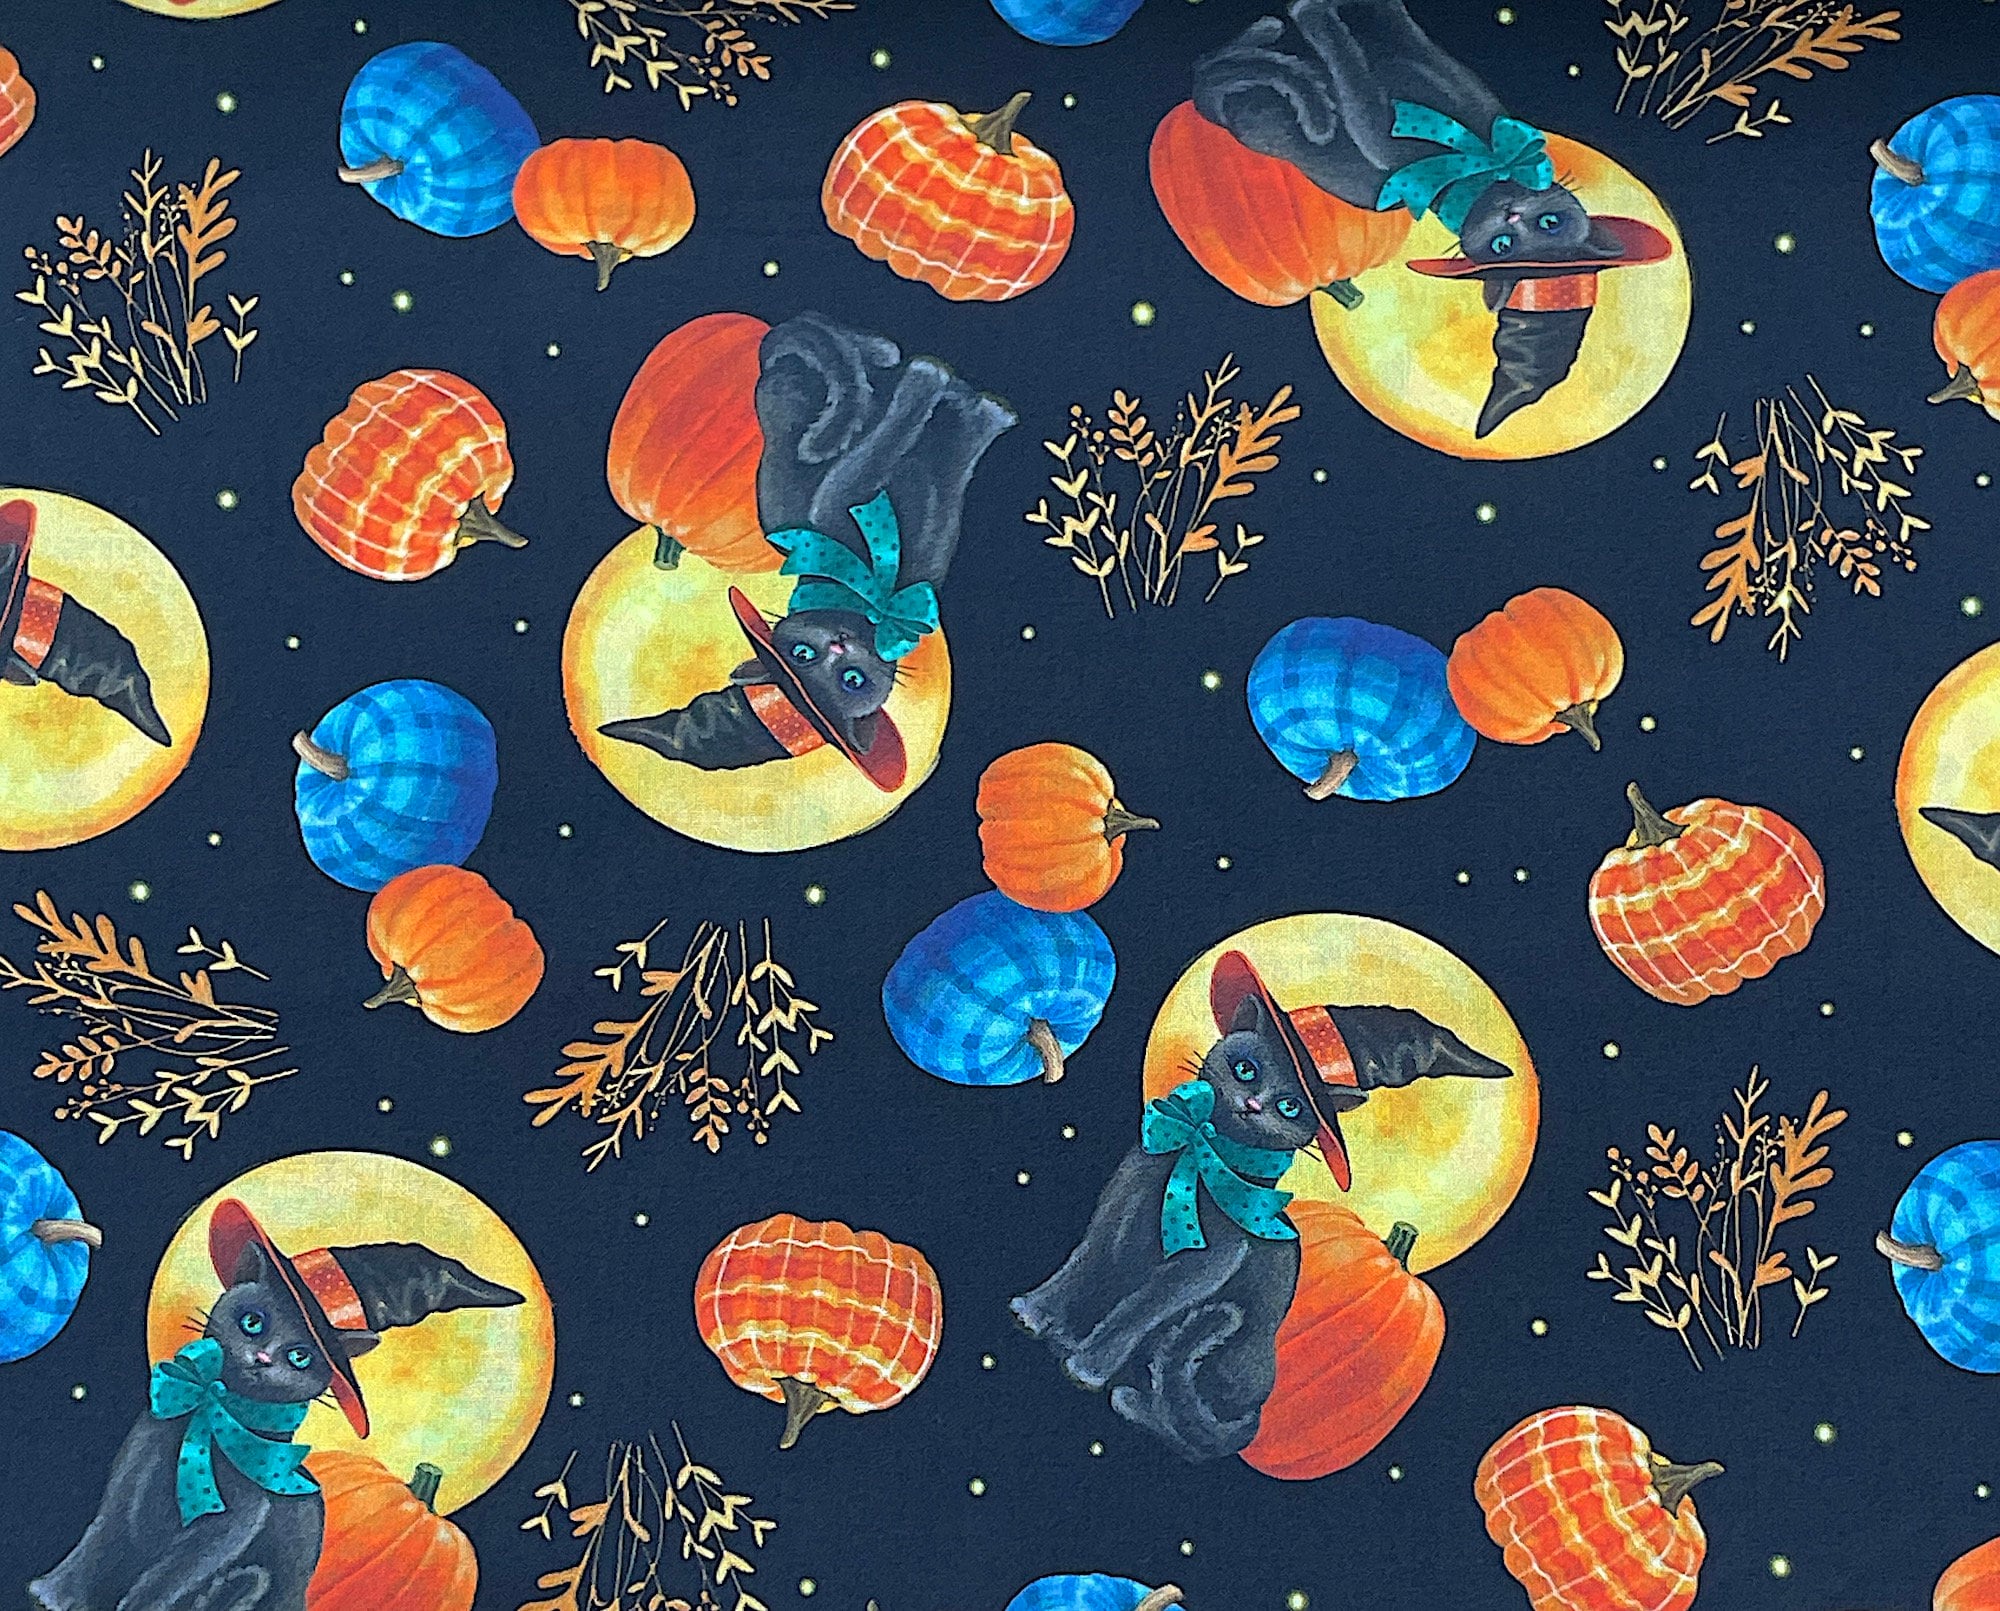 This black fabric is covered with full moons, black cats, pumpkins and more. The cats have scarves and are wearing black hats.